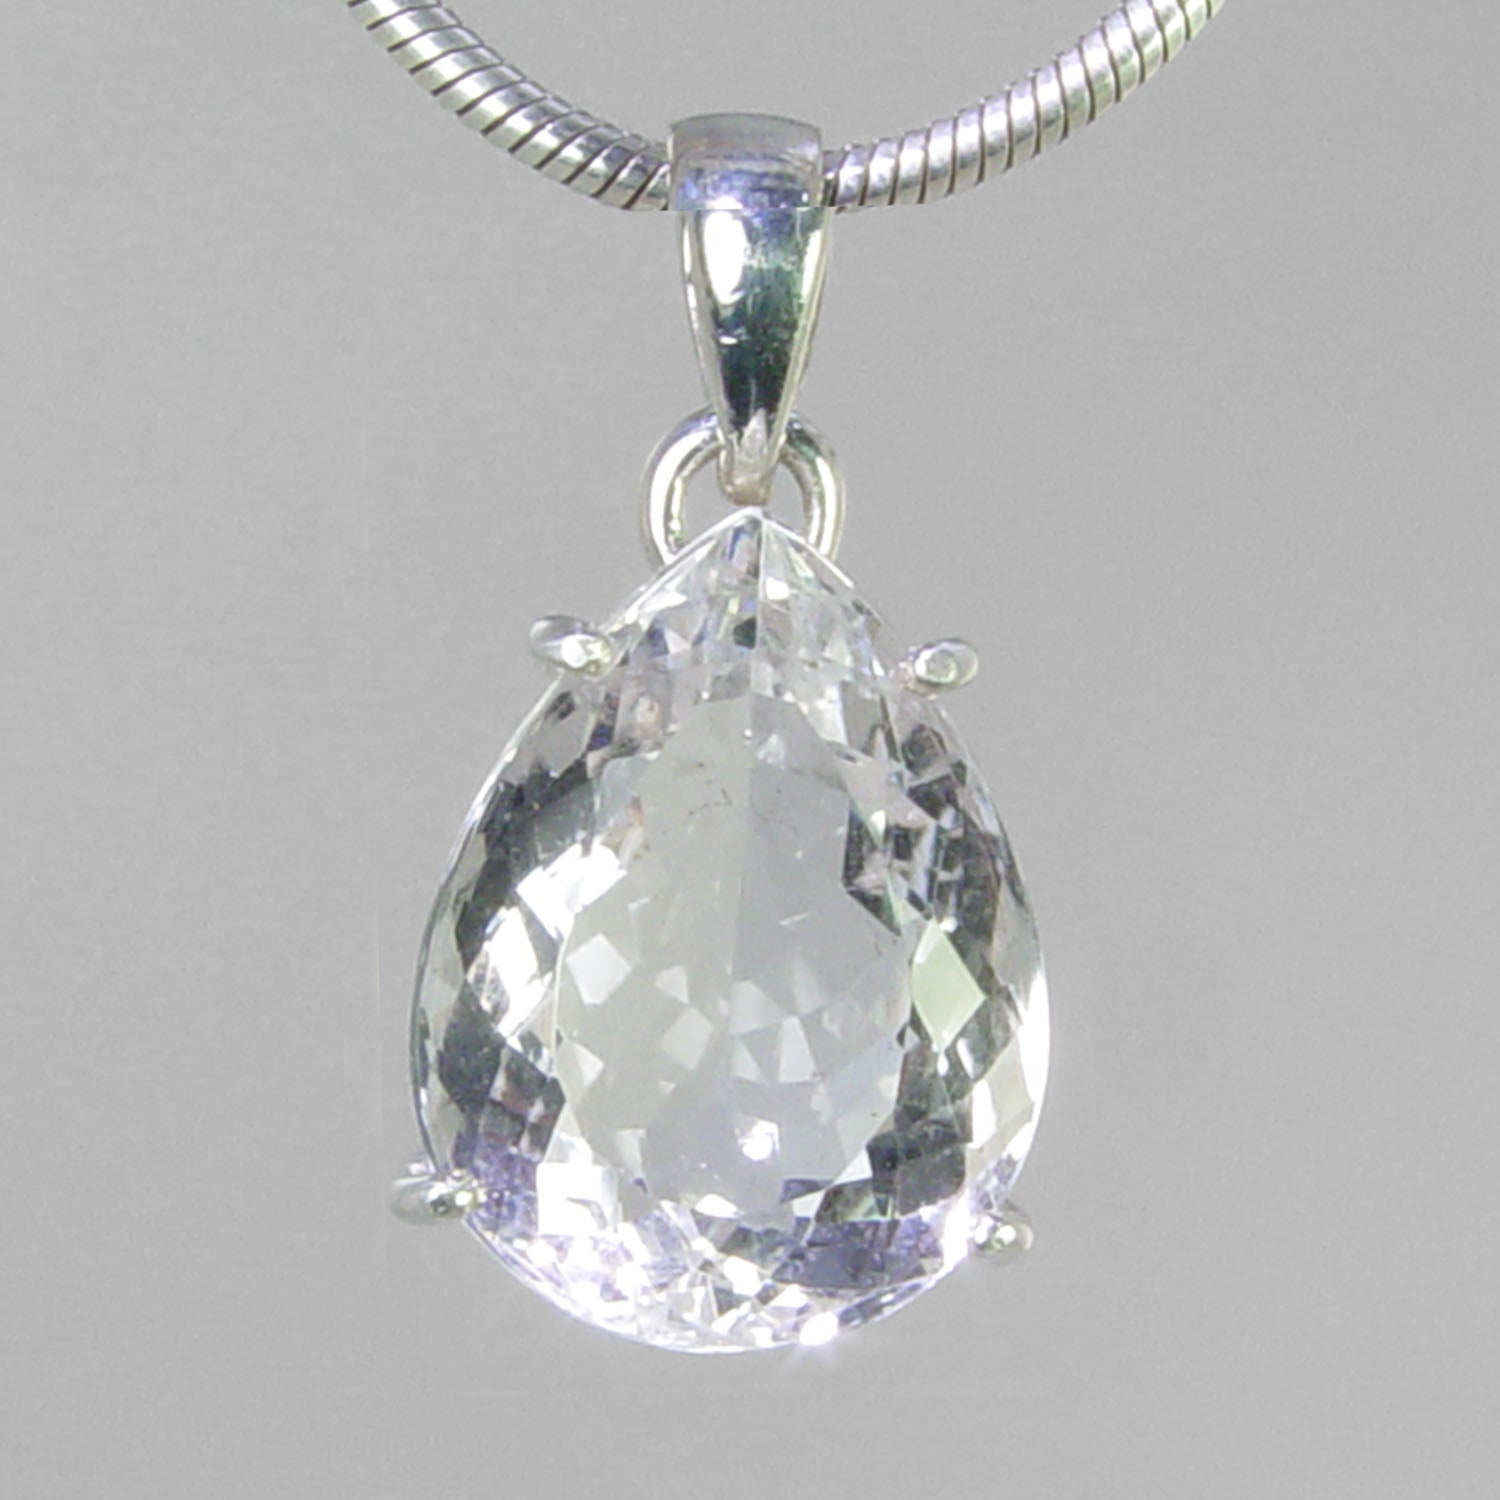 Crystal Quartz 17.2 ct Faceted Pear Shape Sterling Silver Pendant